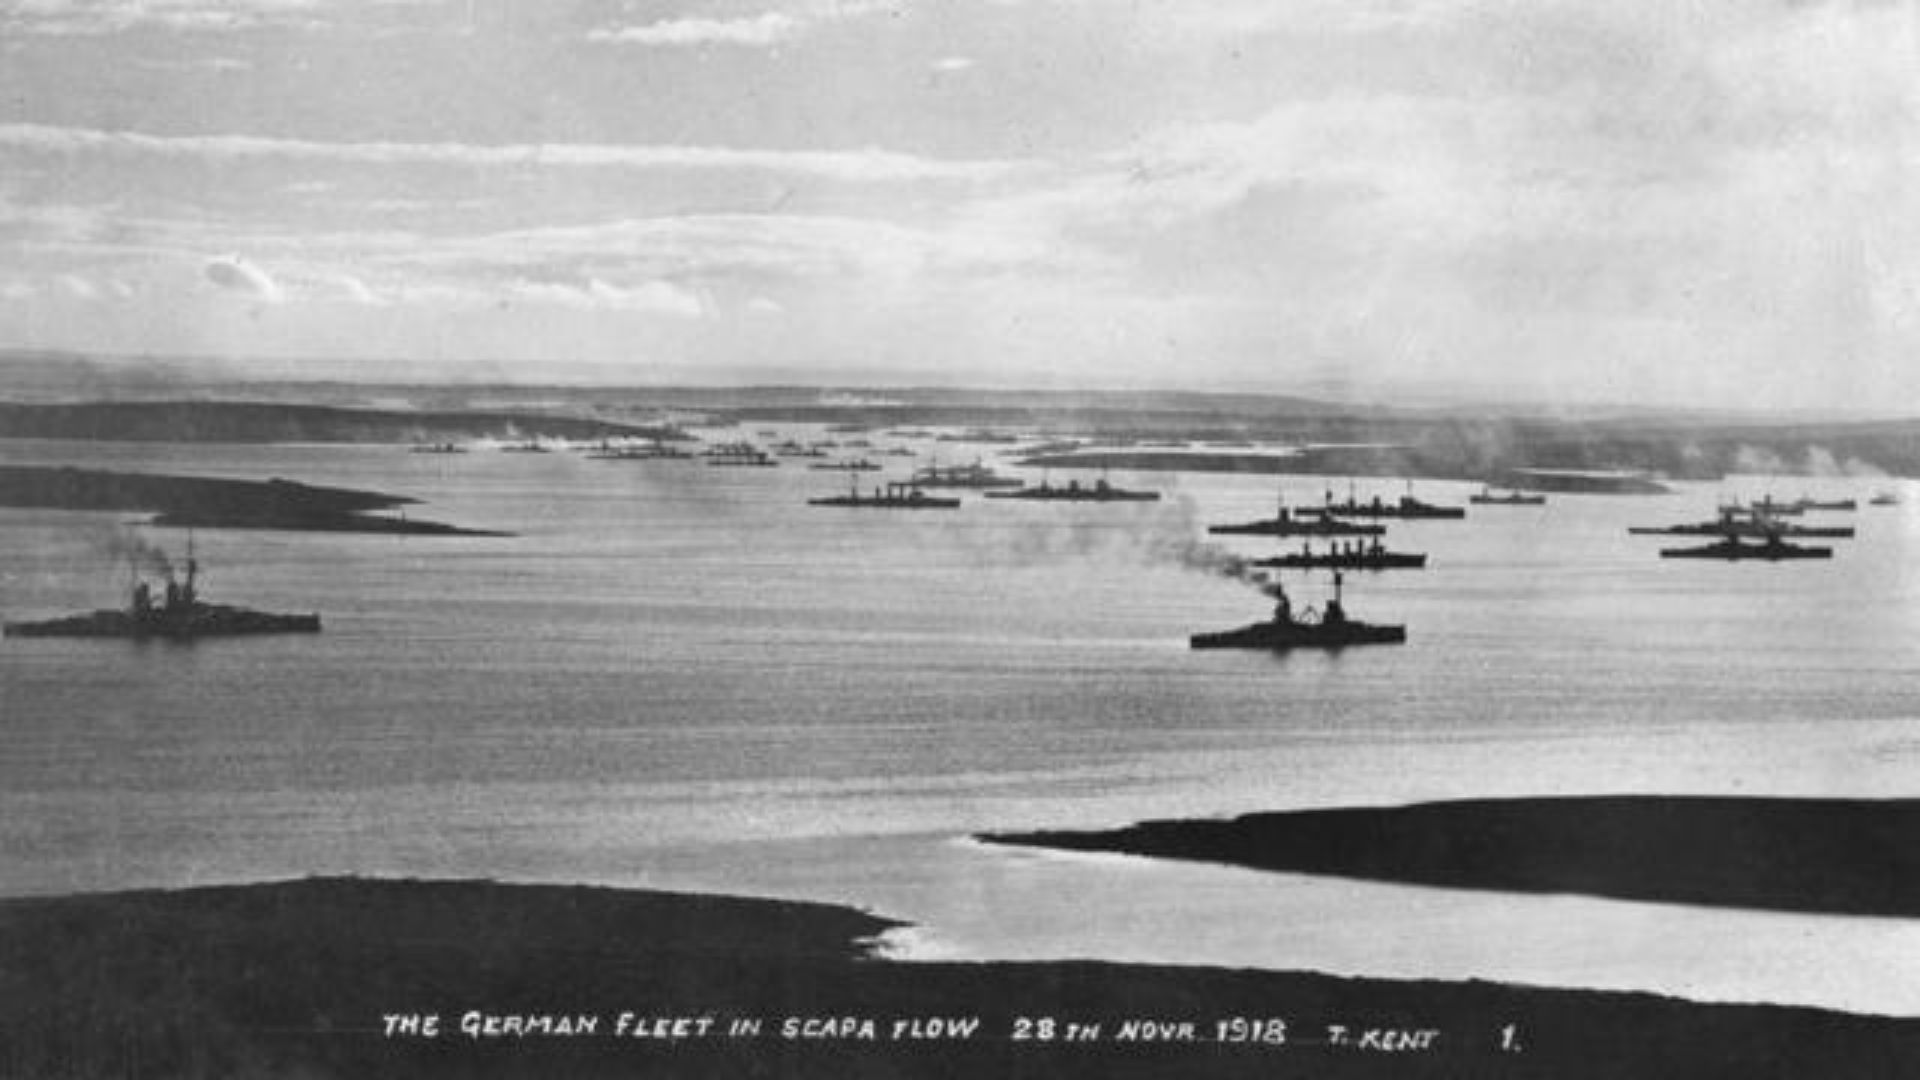 Scapa Flow and the sinking of a fleet